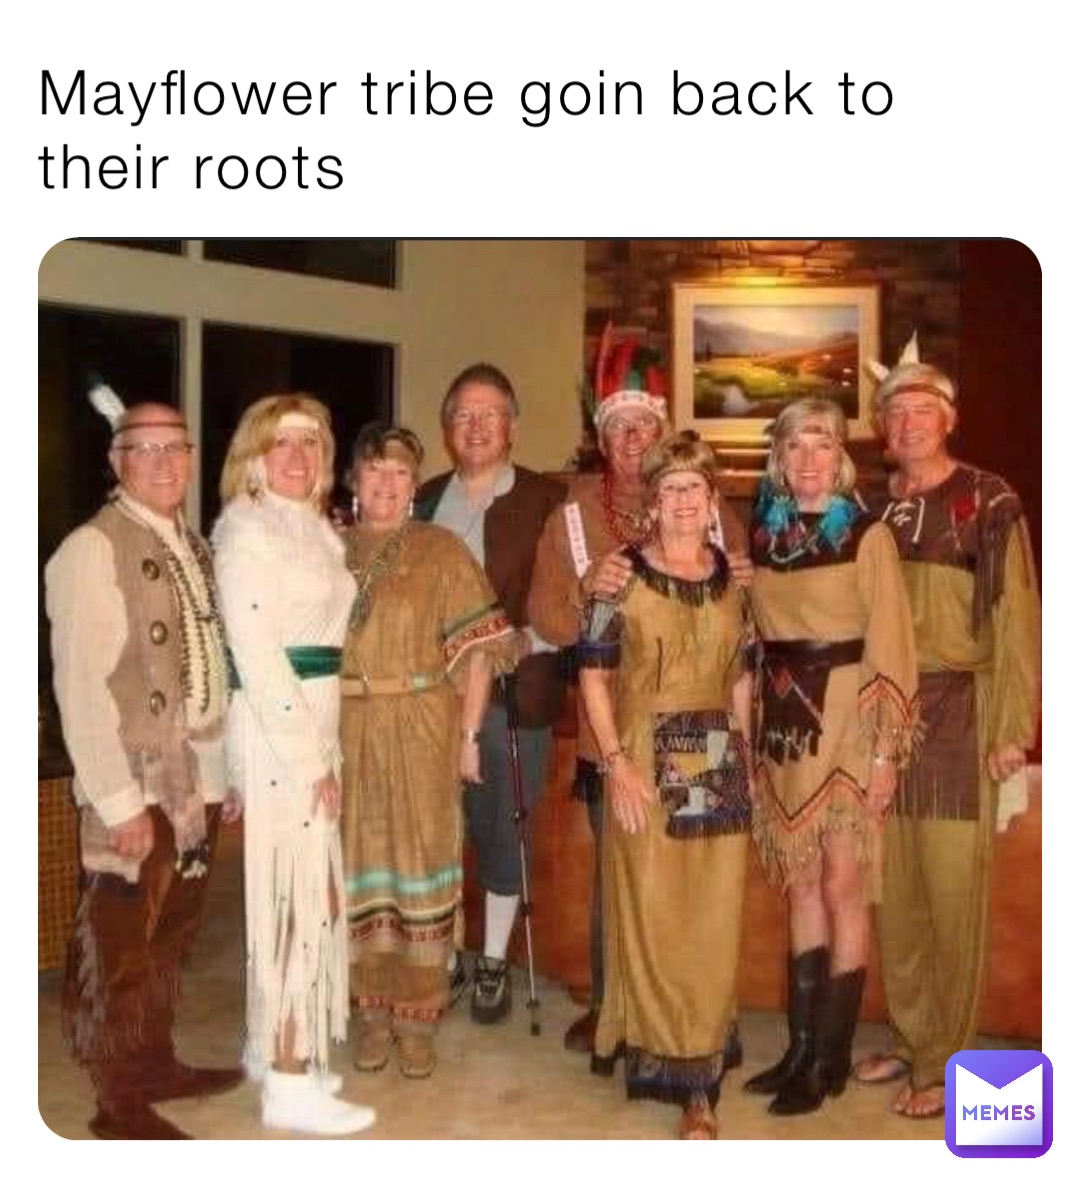 Mayflower tribe goin back to their roots